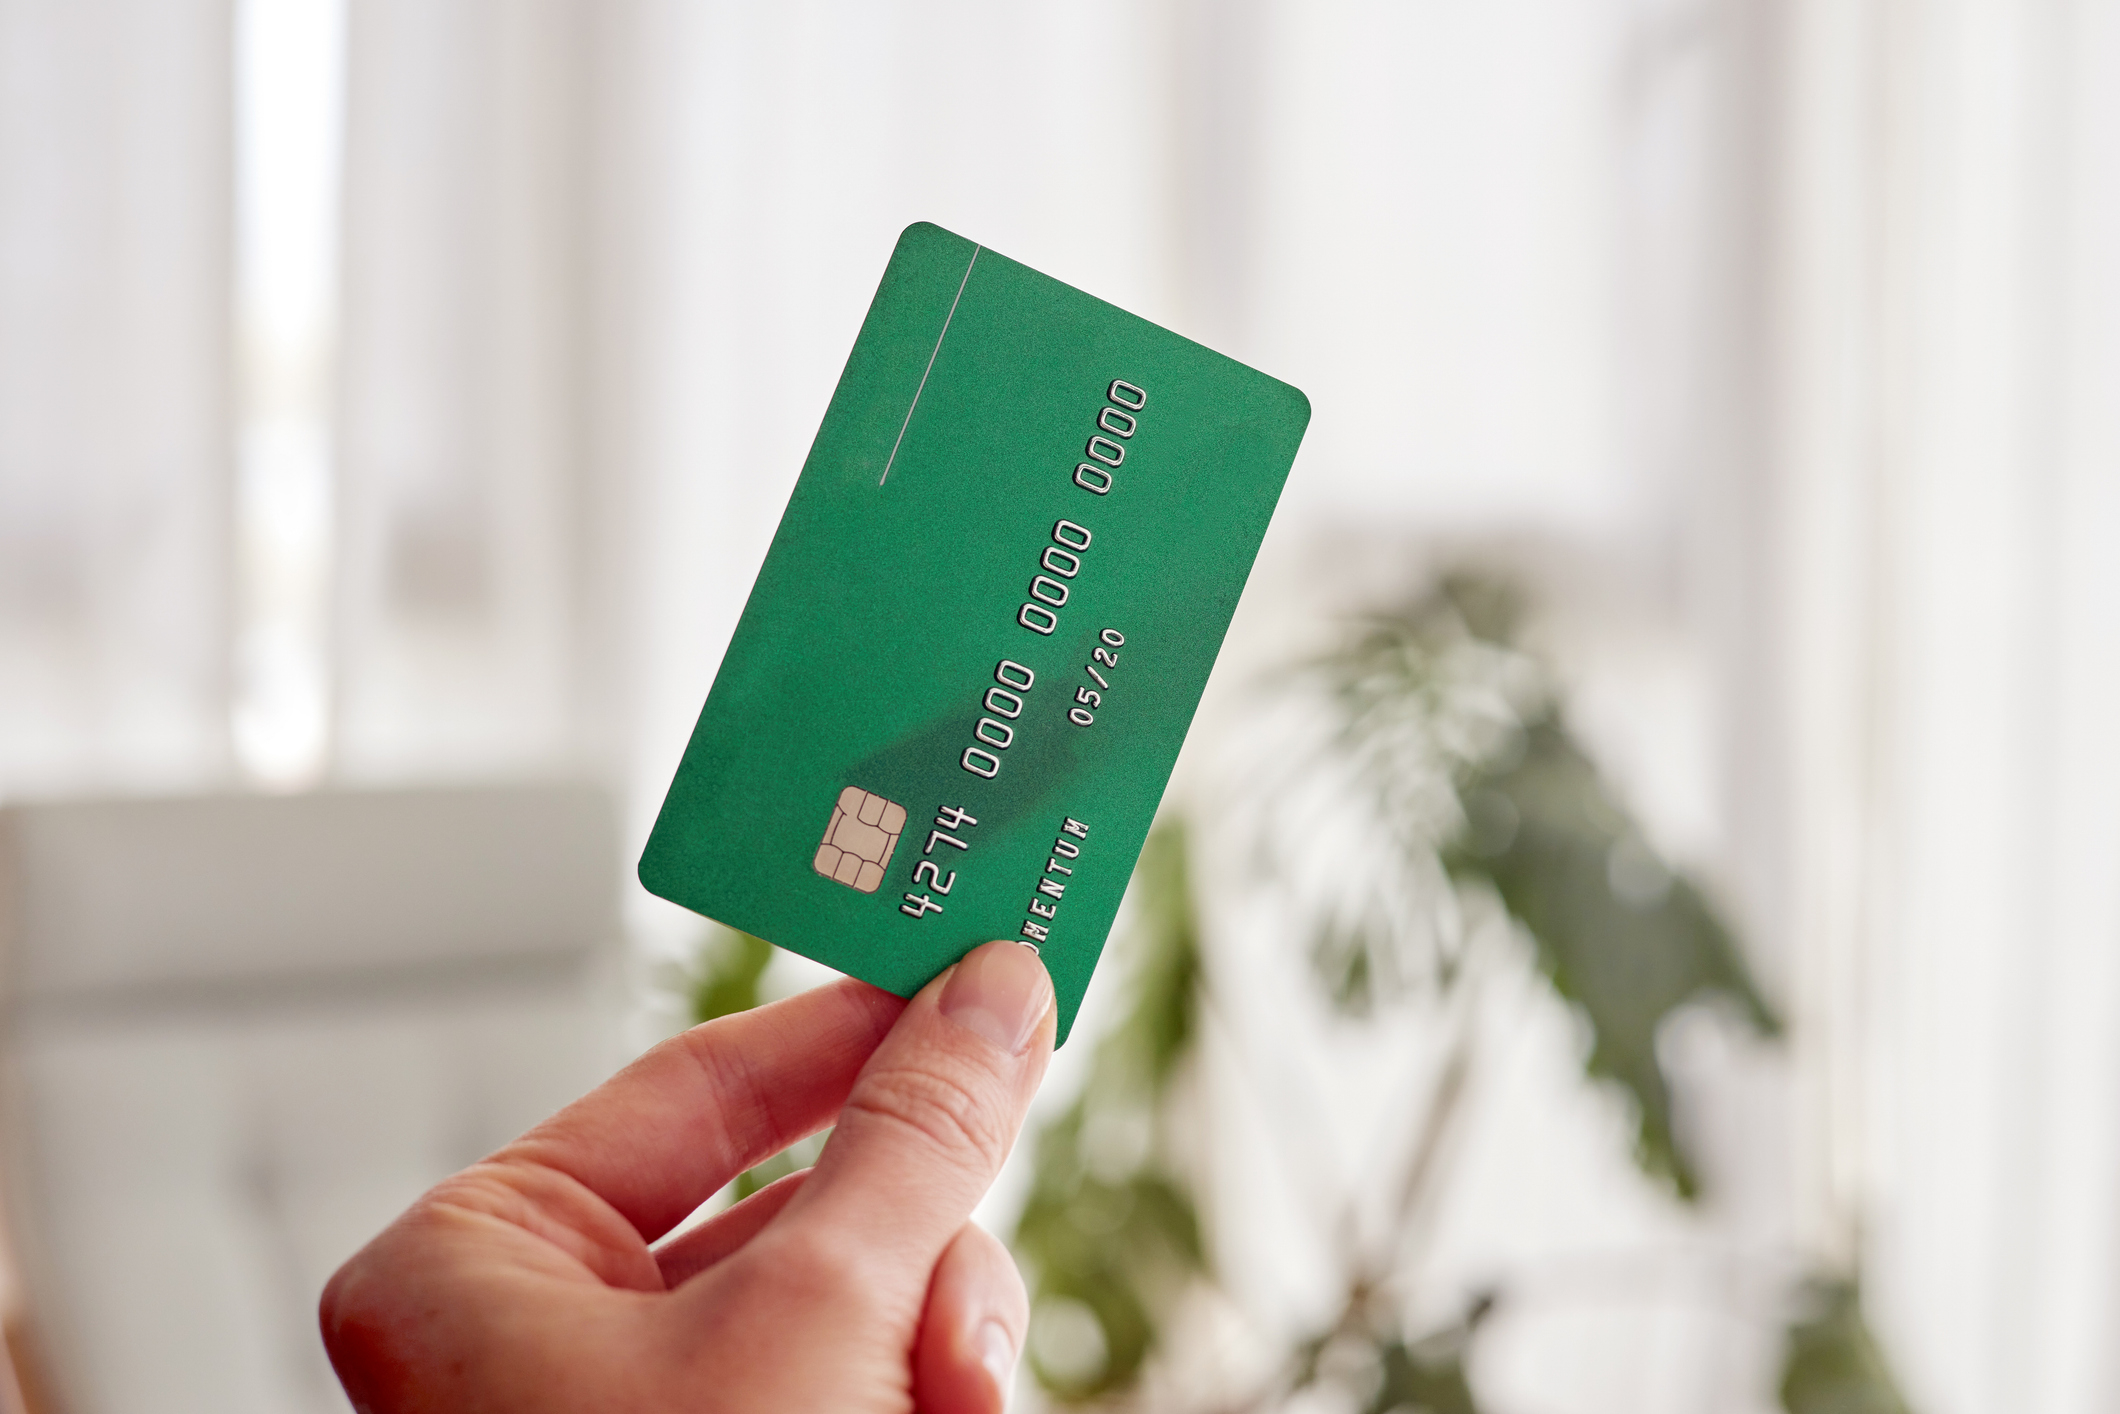 Hand holding a green credit card with the front showing partial numbers and chip